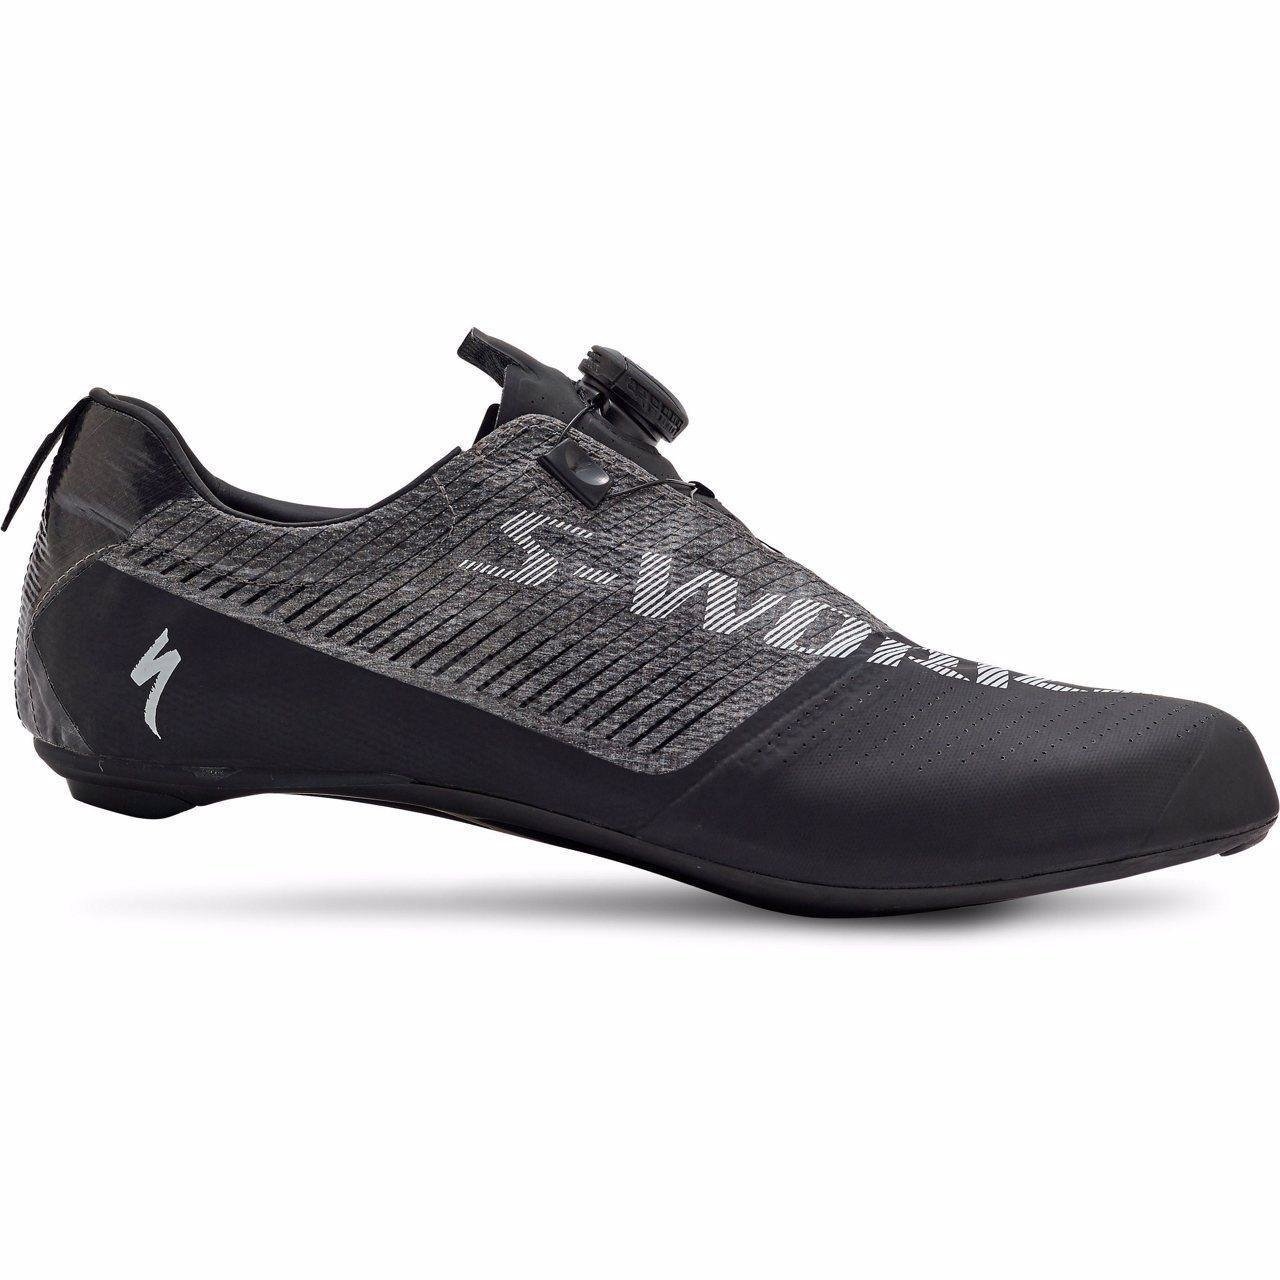 Specialized S-Works EXOS Road Shoes